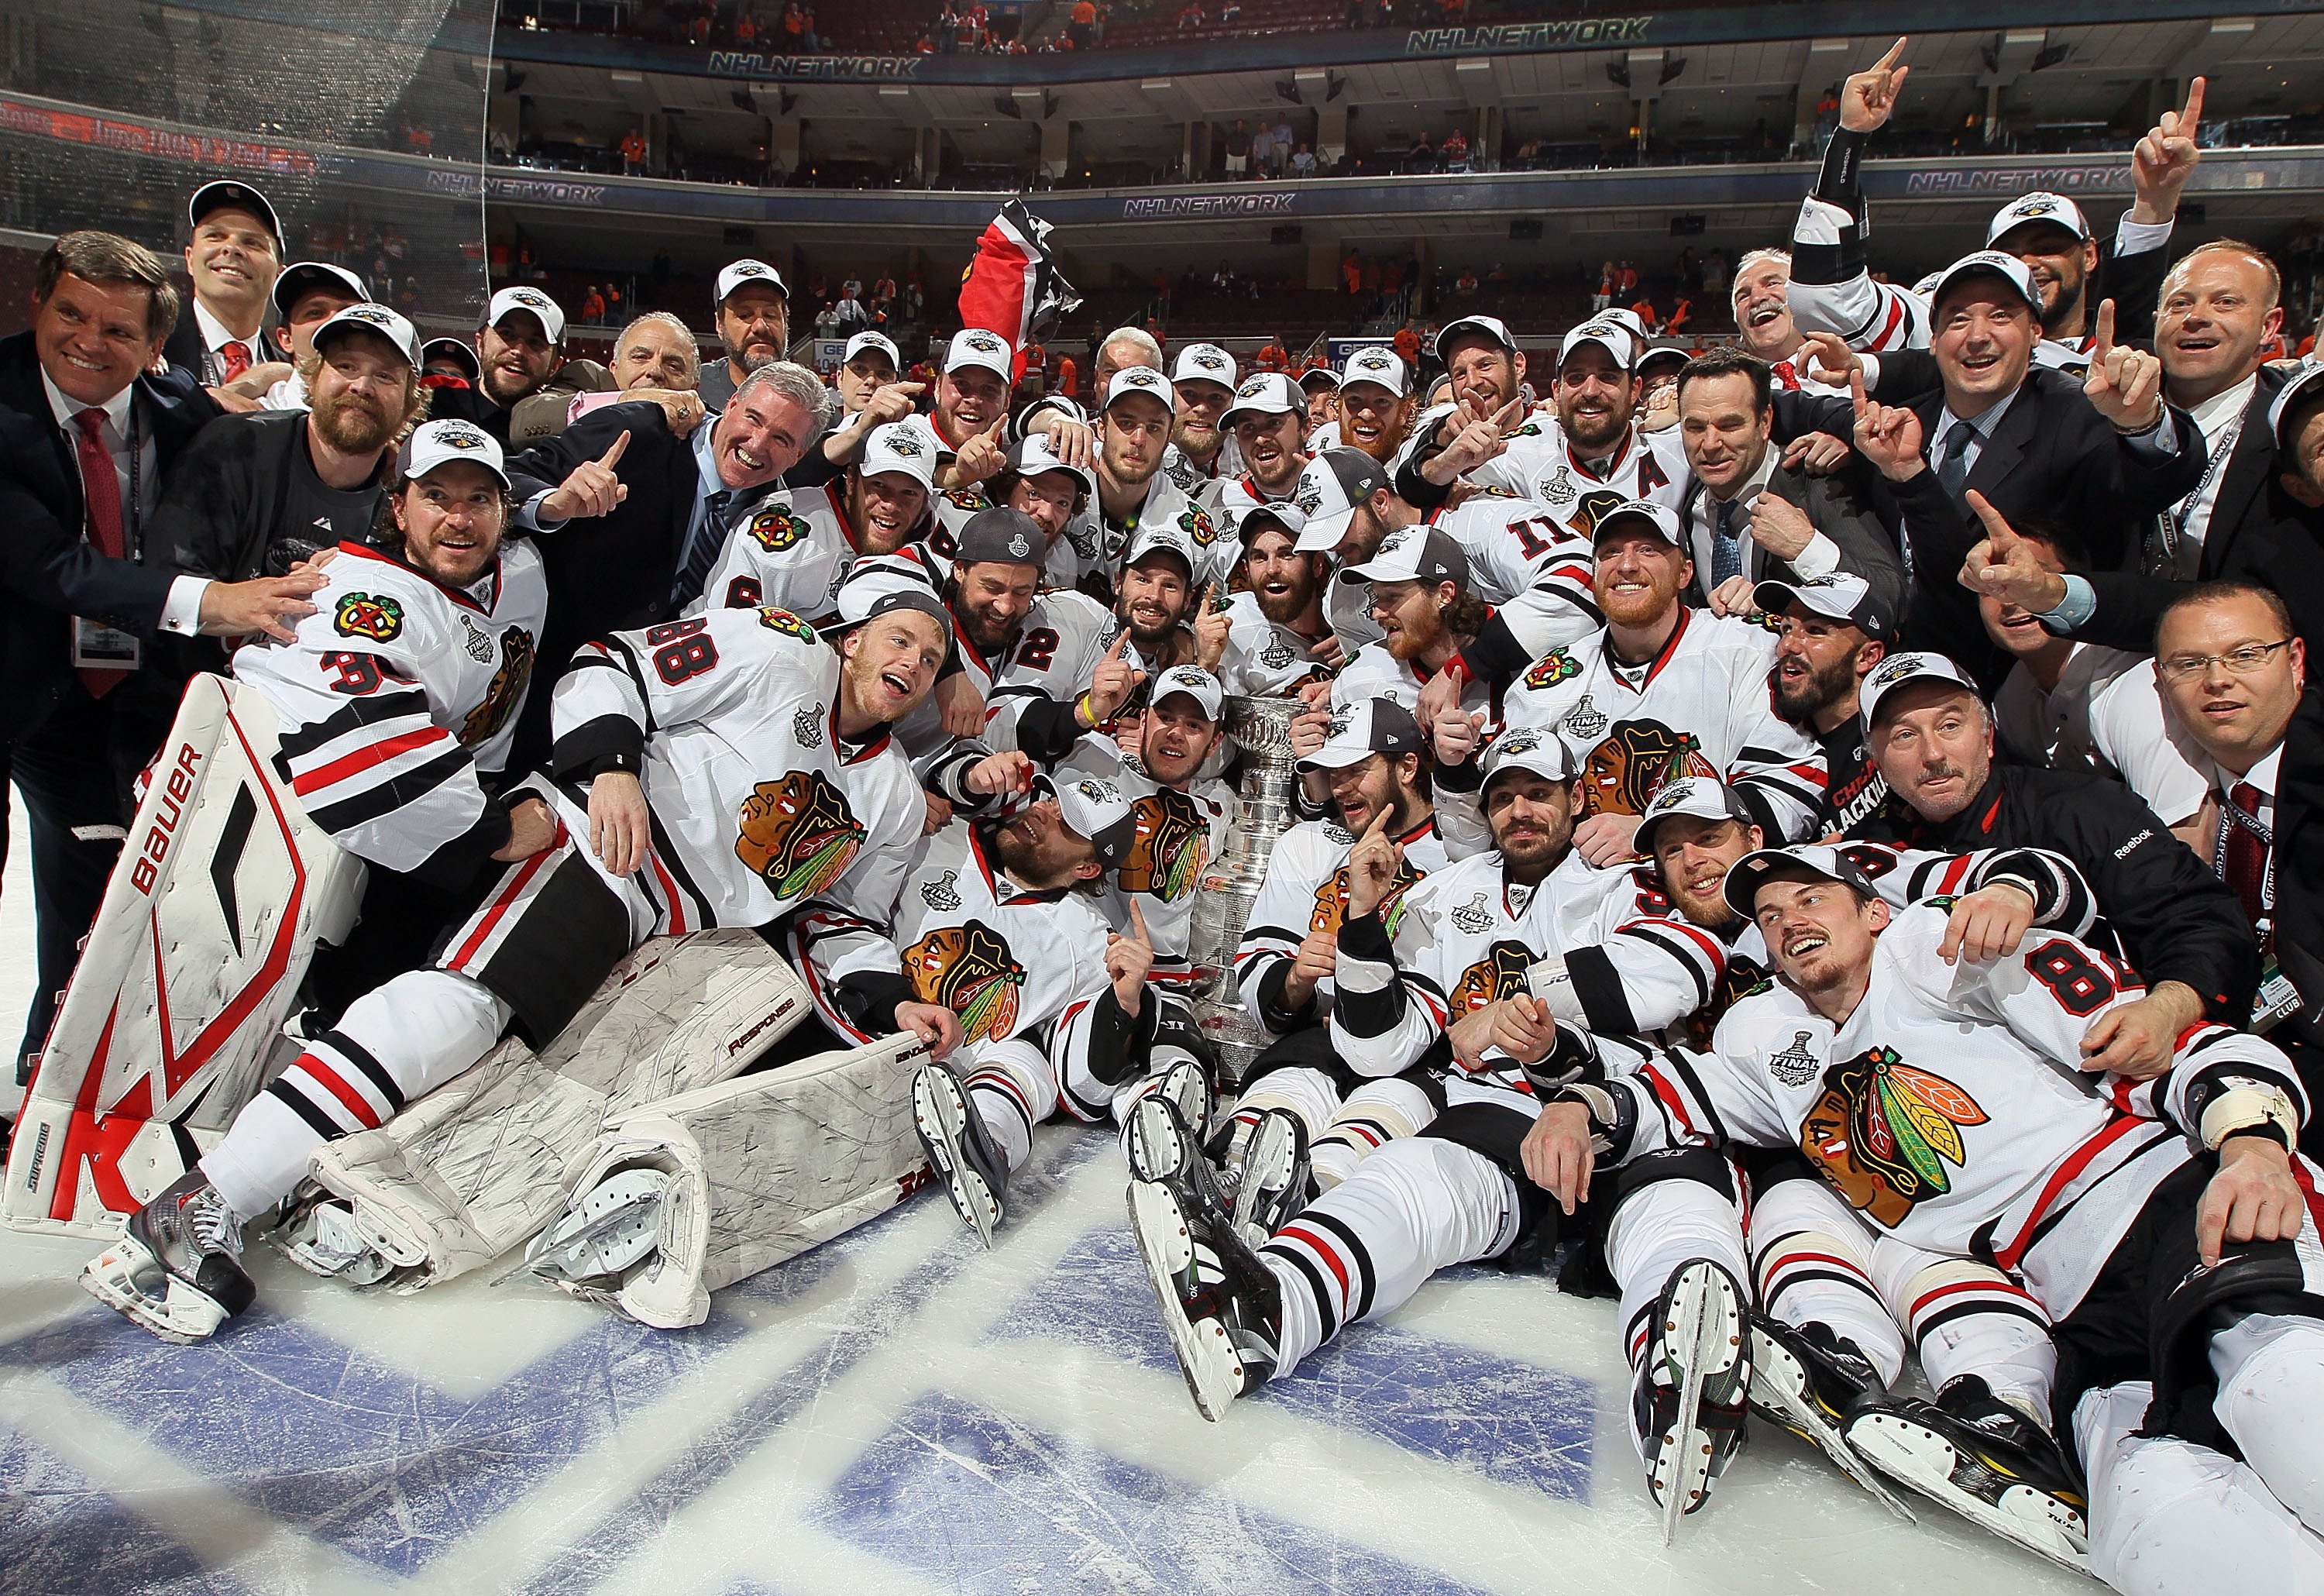 PHILADELPHIA - JUNE 09:  The Chicago Blackhawks pose for a team photo after defeating the Philadelphia Flyers 4-3 in overtime and win the Stanley Cup in Game Six of the 2010 NHL Stanley Cup Final at the Wachovia Center on June 9, 2010 in Philadelphia, Pen